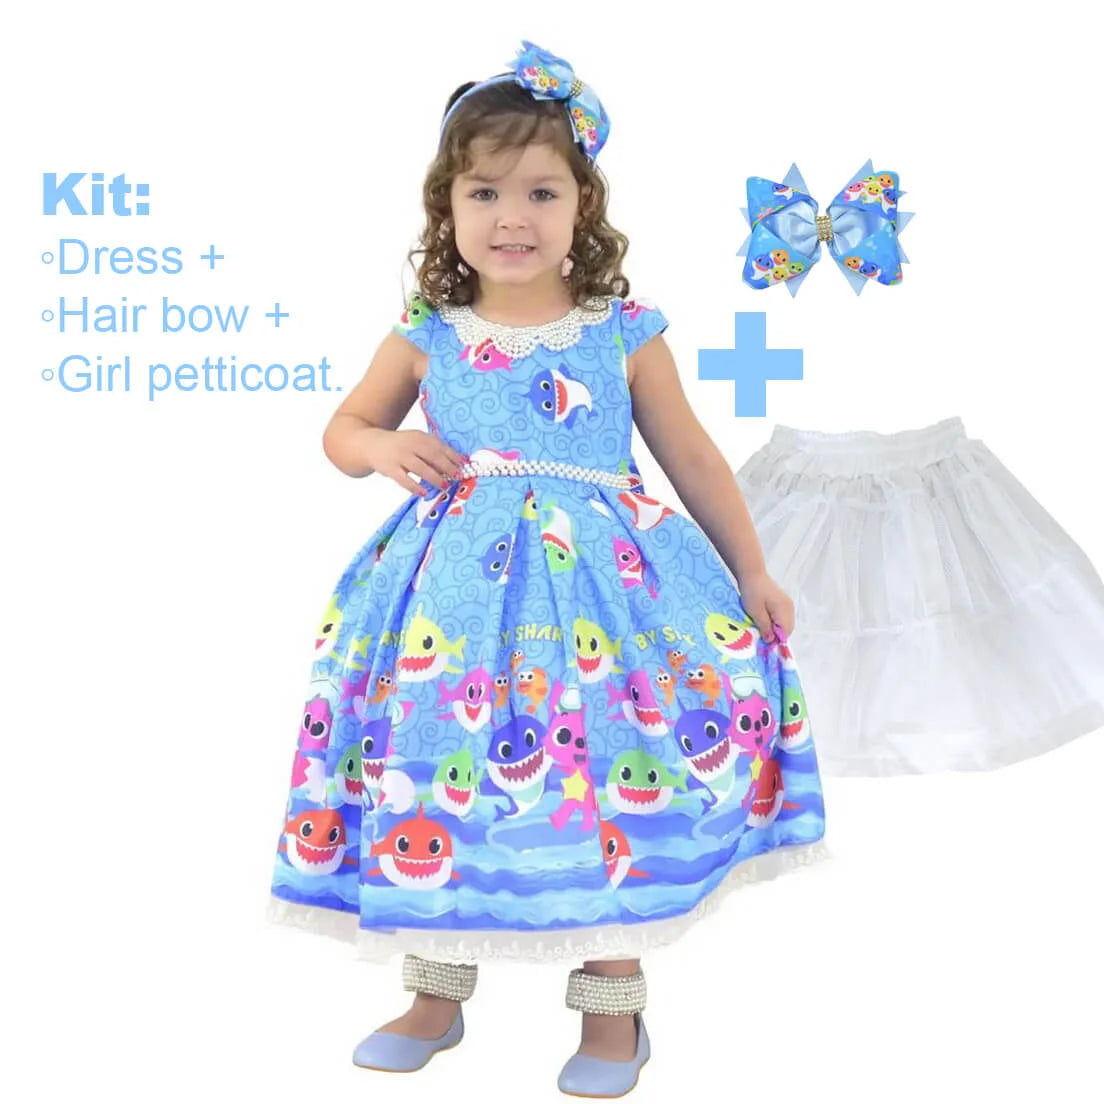 Combo Pack Of 3 Cotton Petticoat